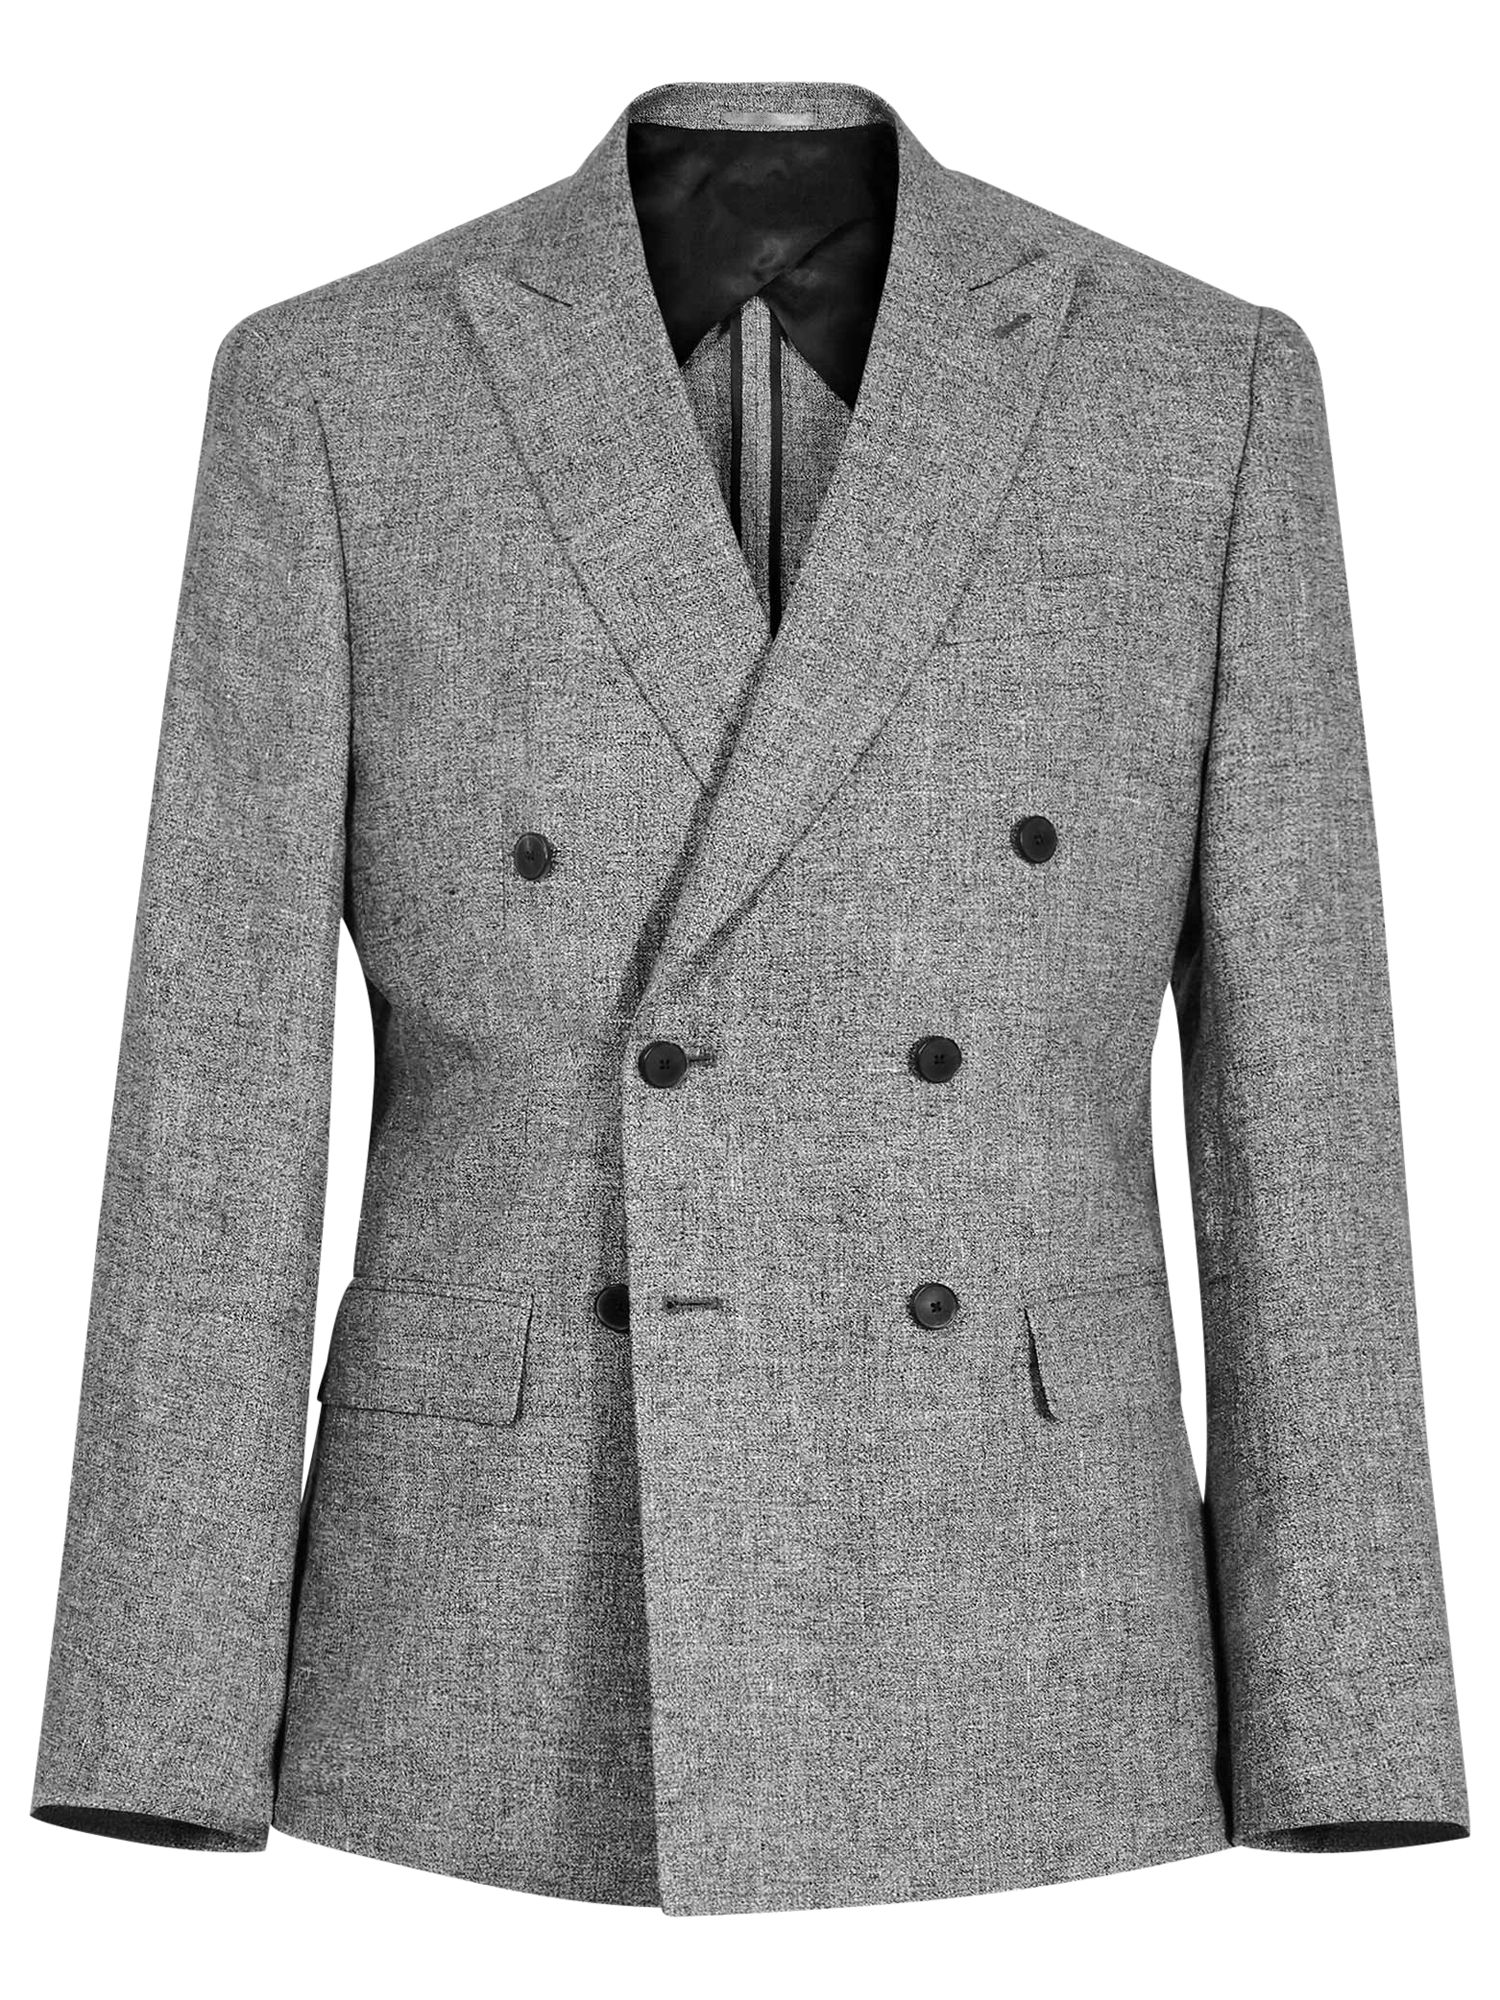 Reiss Luxor Double Breasted Linen Suit Jacket, Grey at John Lewis ...